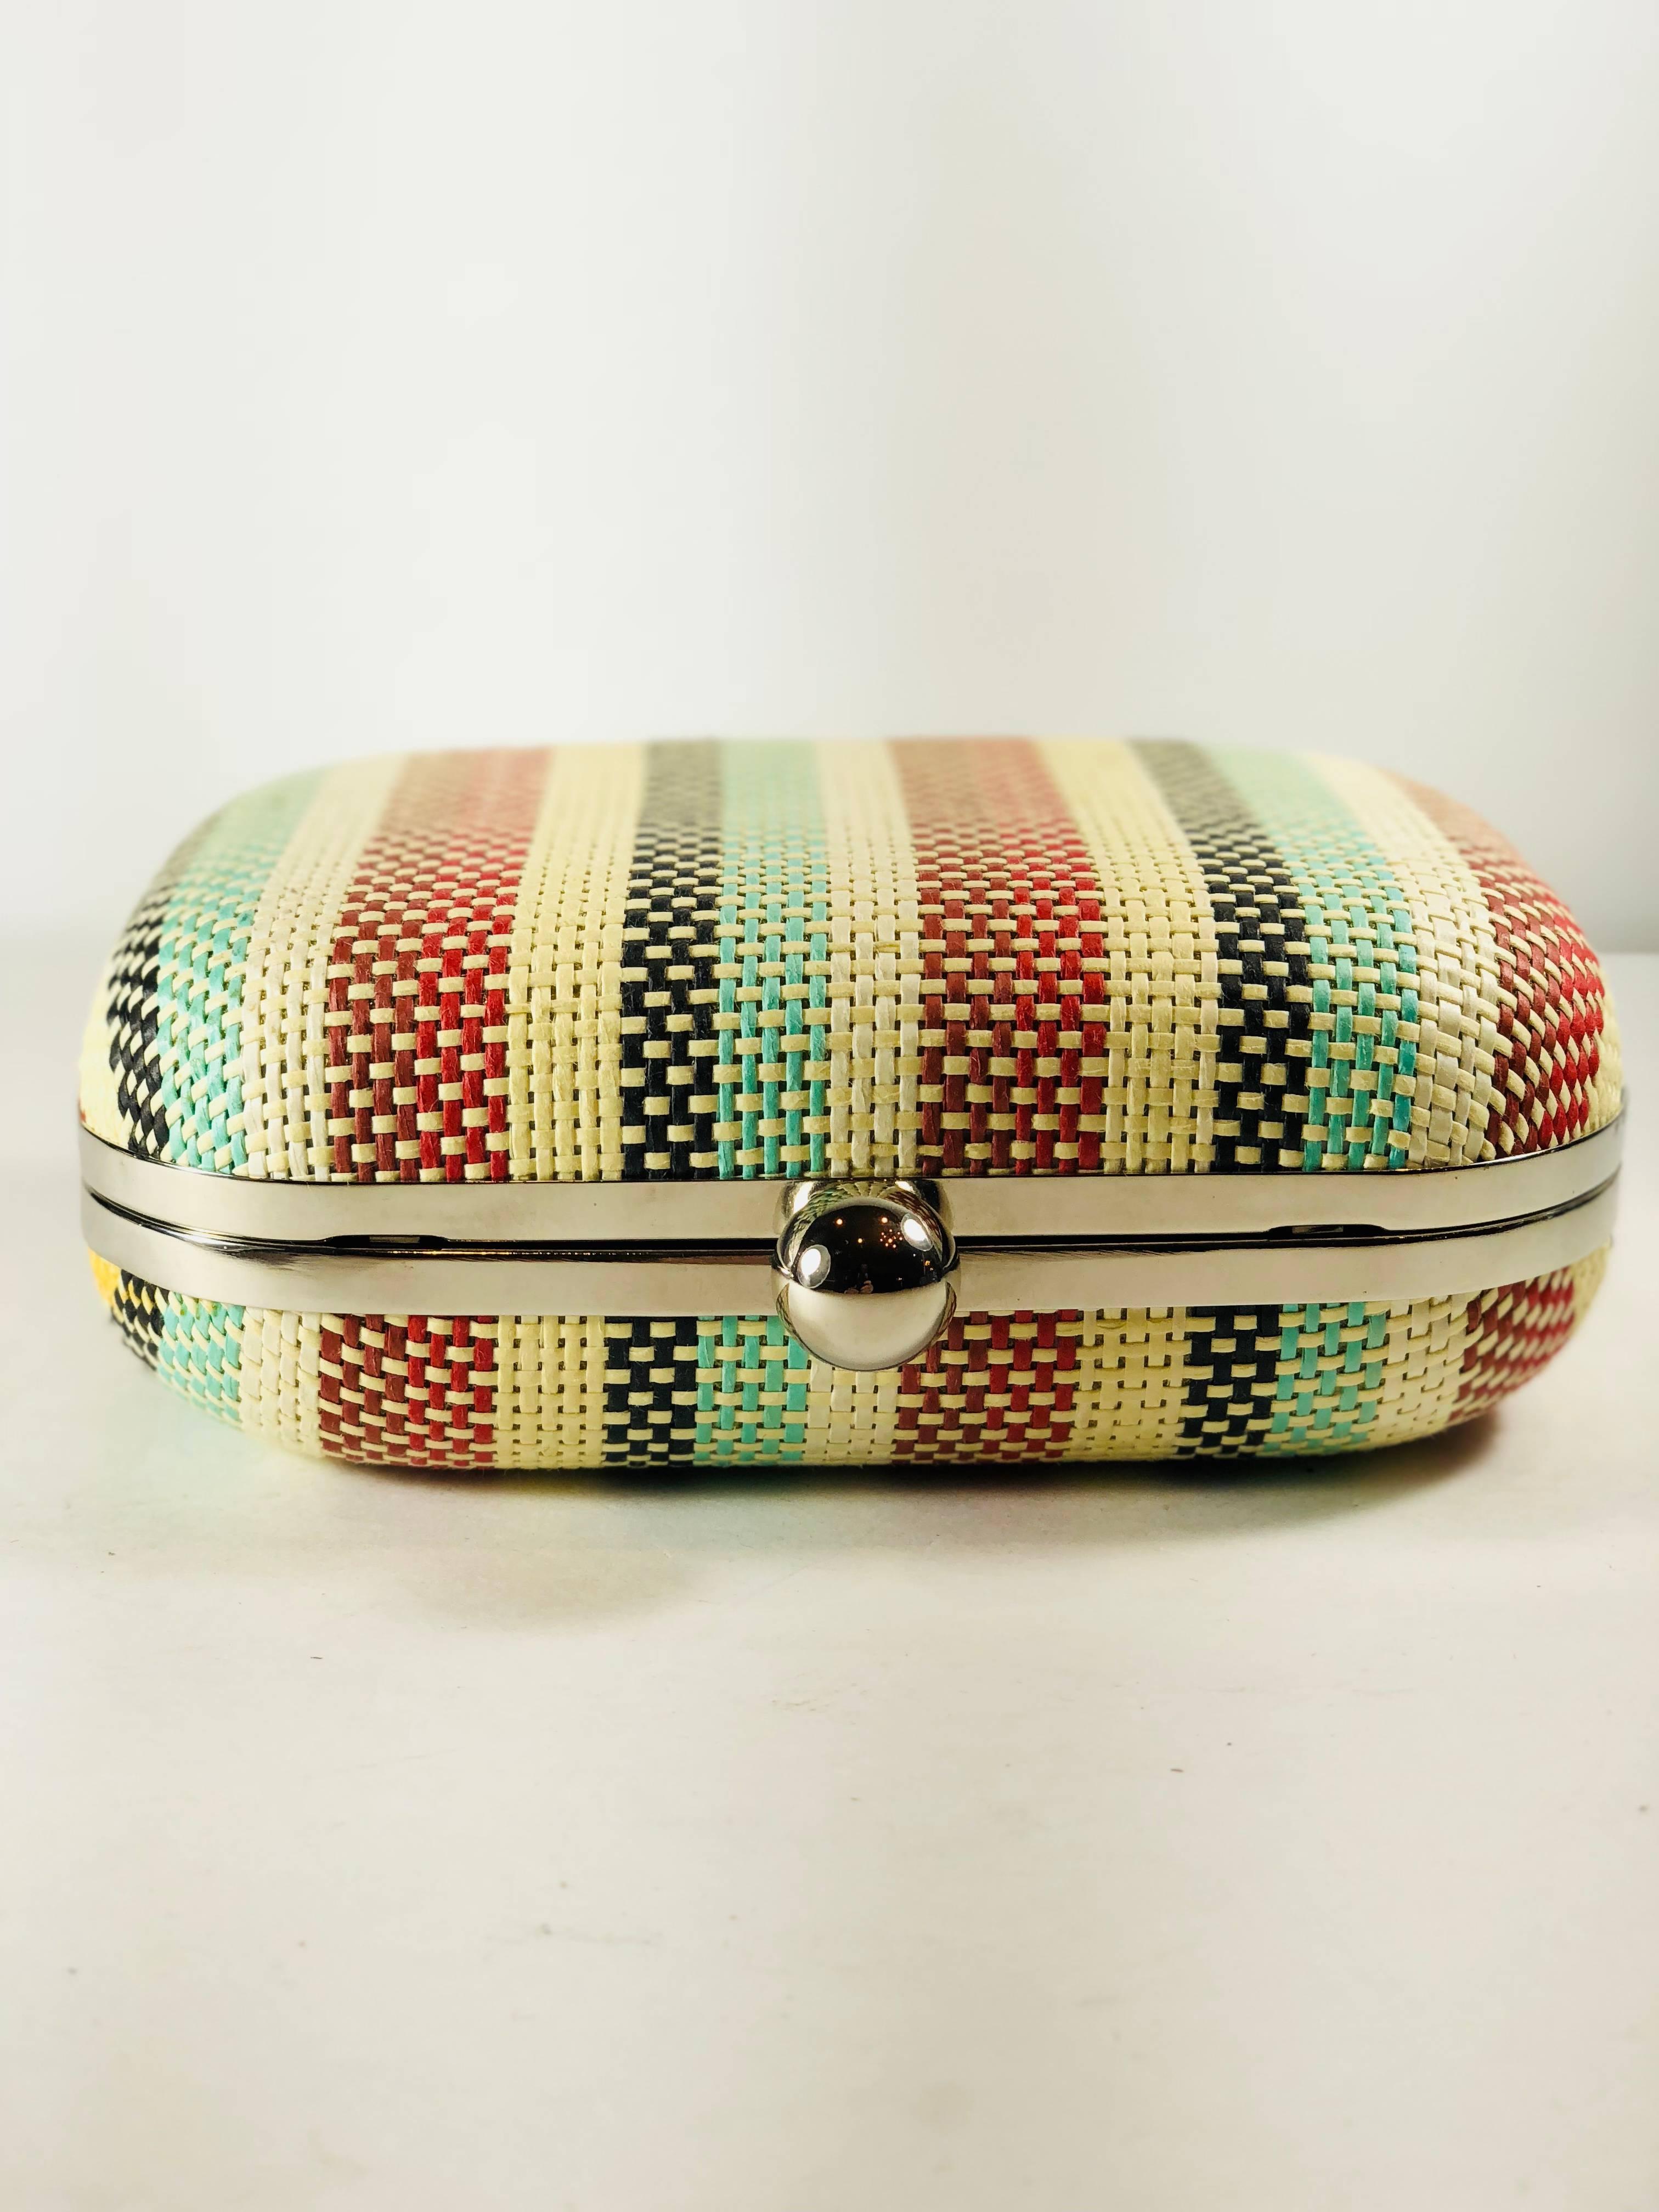 Lilith Striped Woven Clutch, Snap top closure with Long Silver Chain Strap